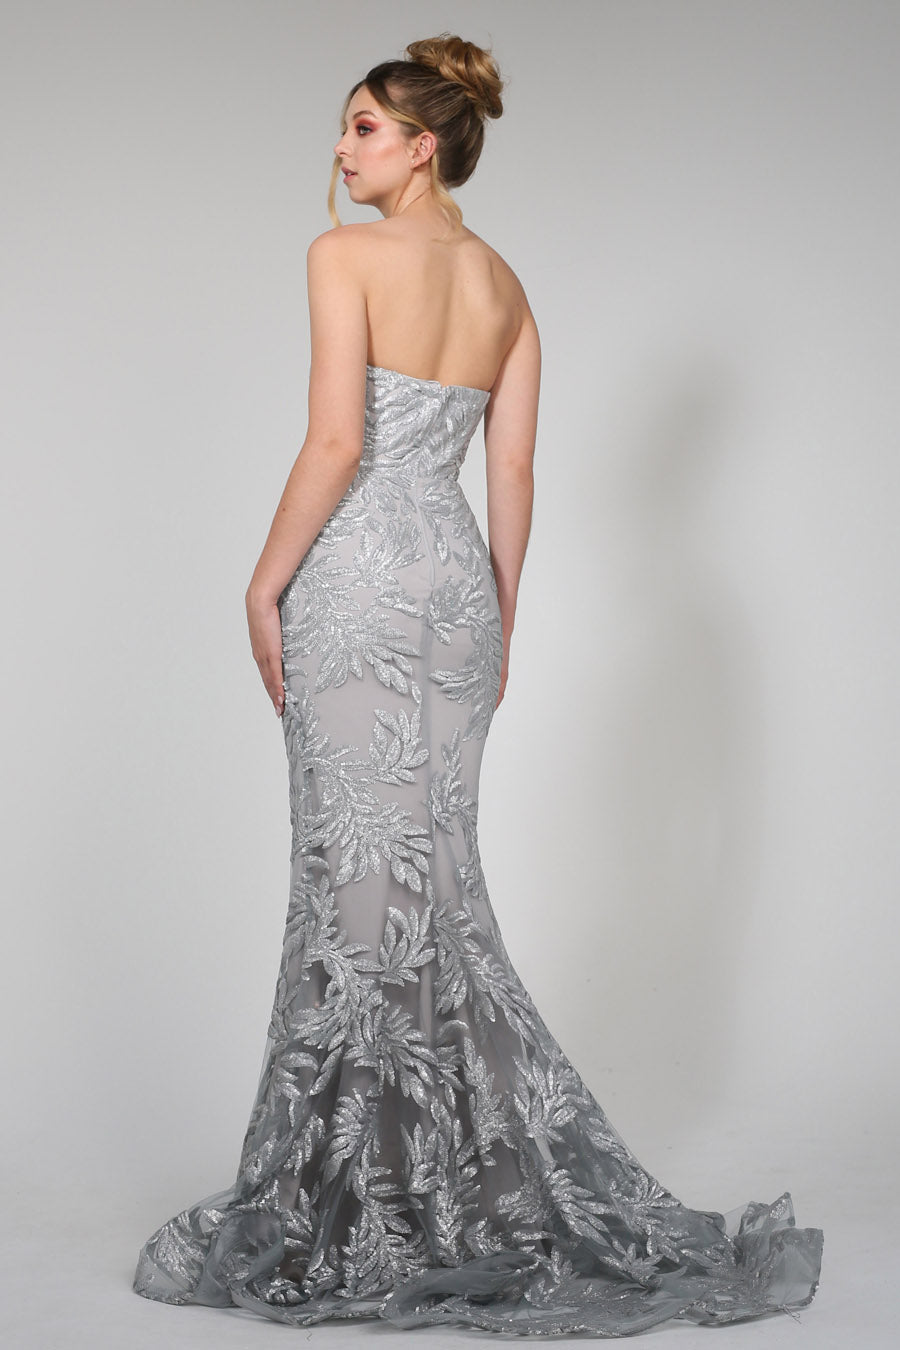 Tina Holly Couture TA107 Silver Sequin &amp; Mesh Strapless Mermaid Formal Dress {vendor} AfterPay Humm ZipPay LayBuy Sezzle